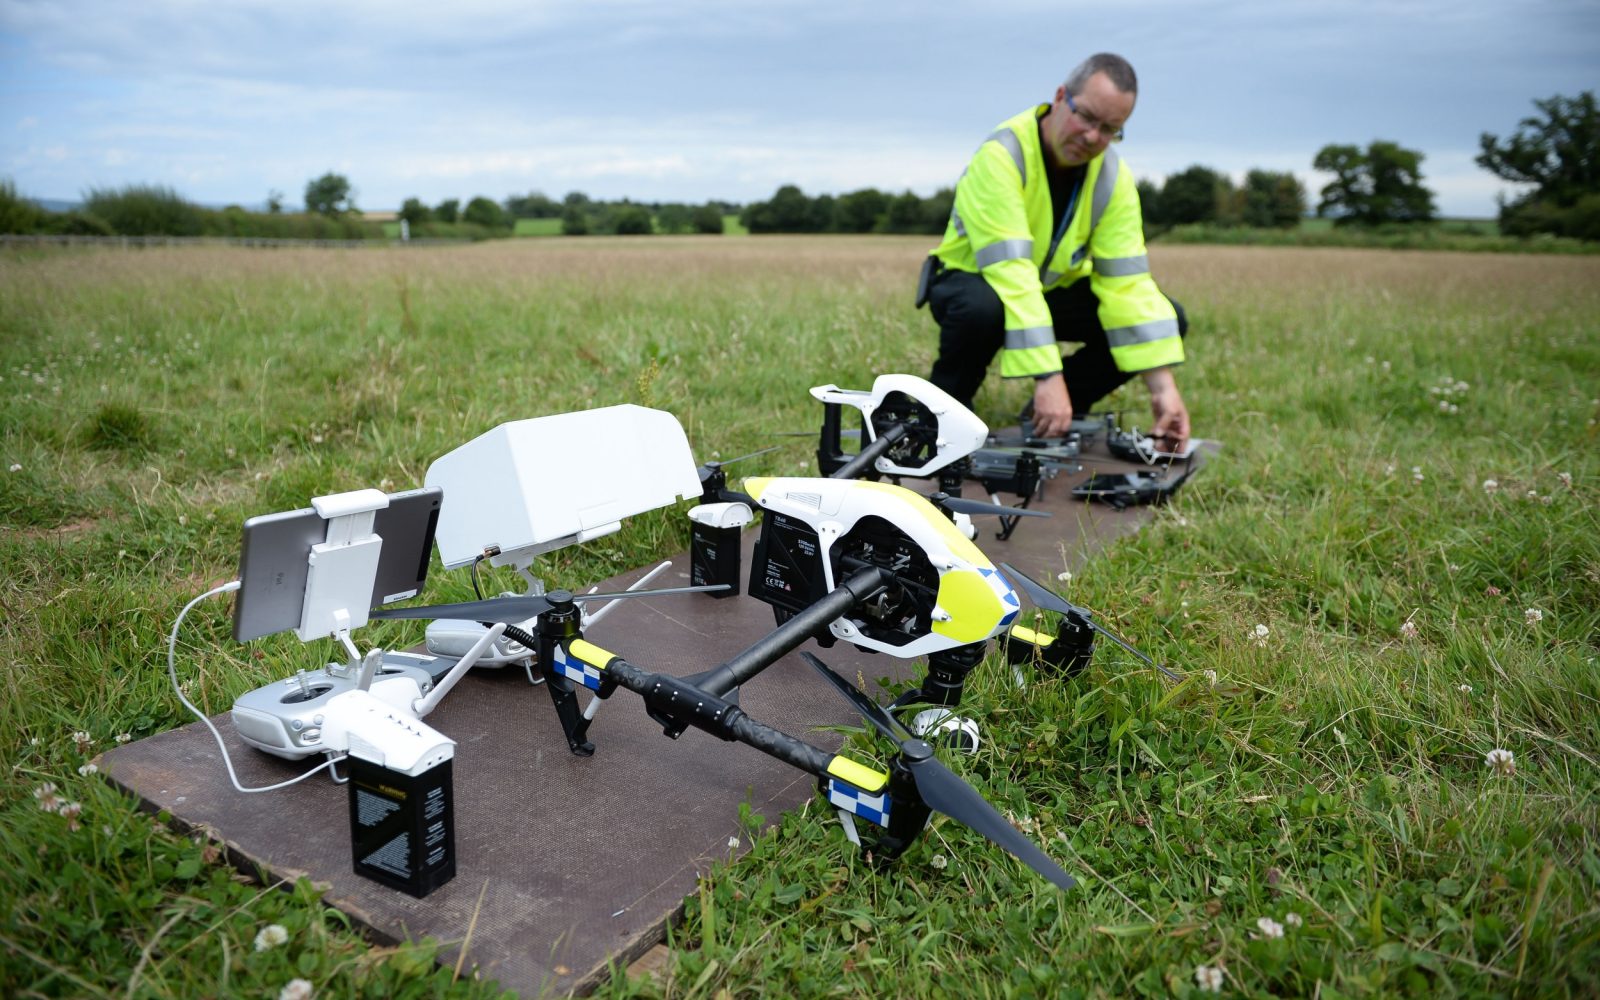 New laws are coming to UK drone pilots.